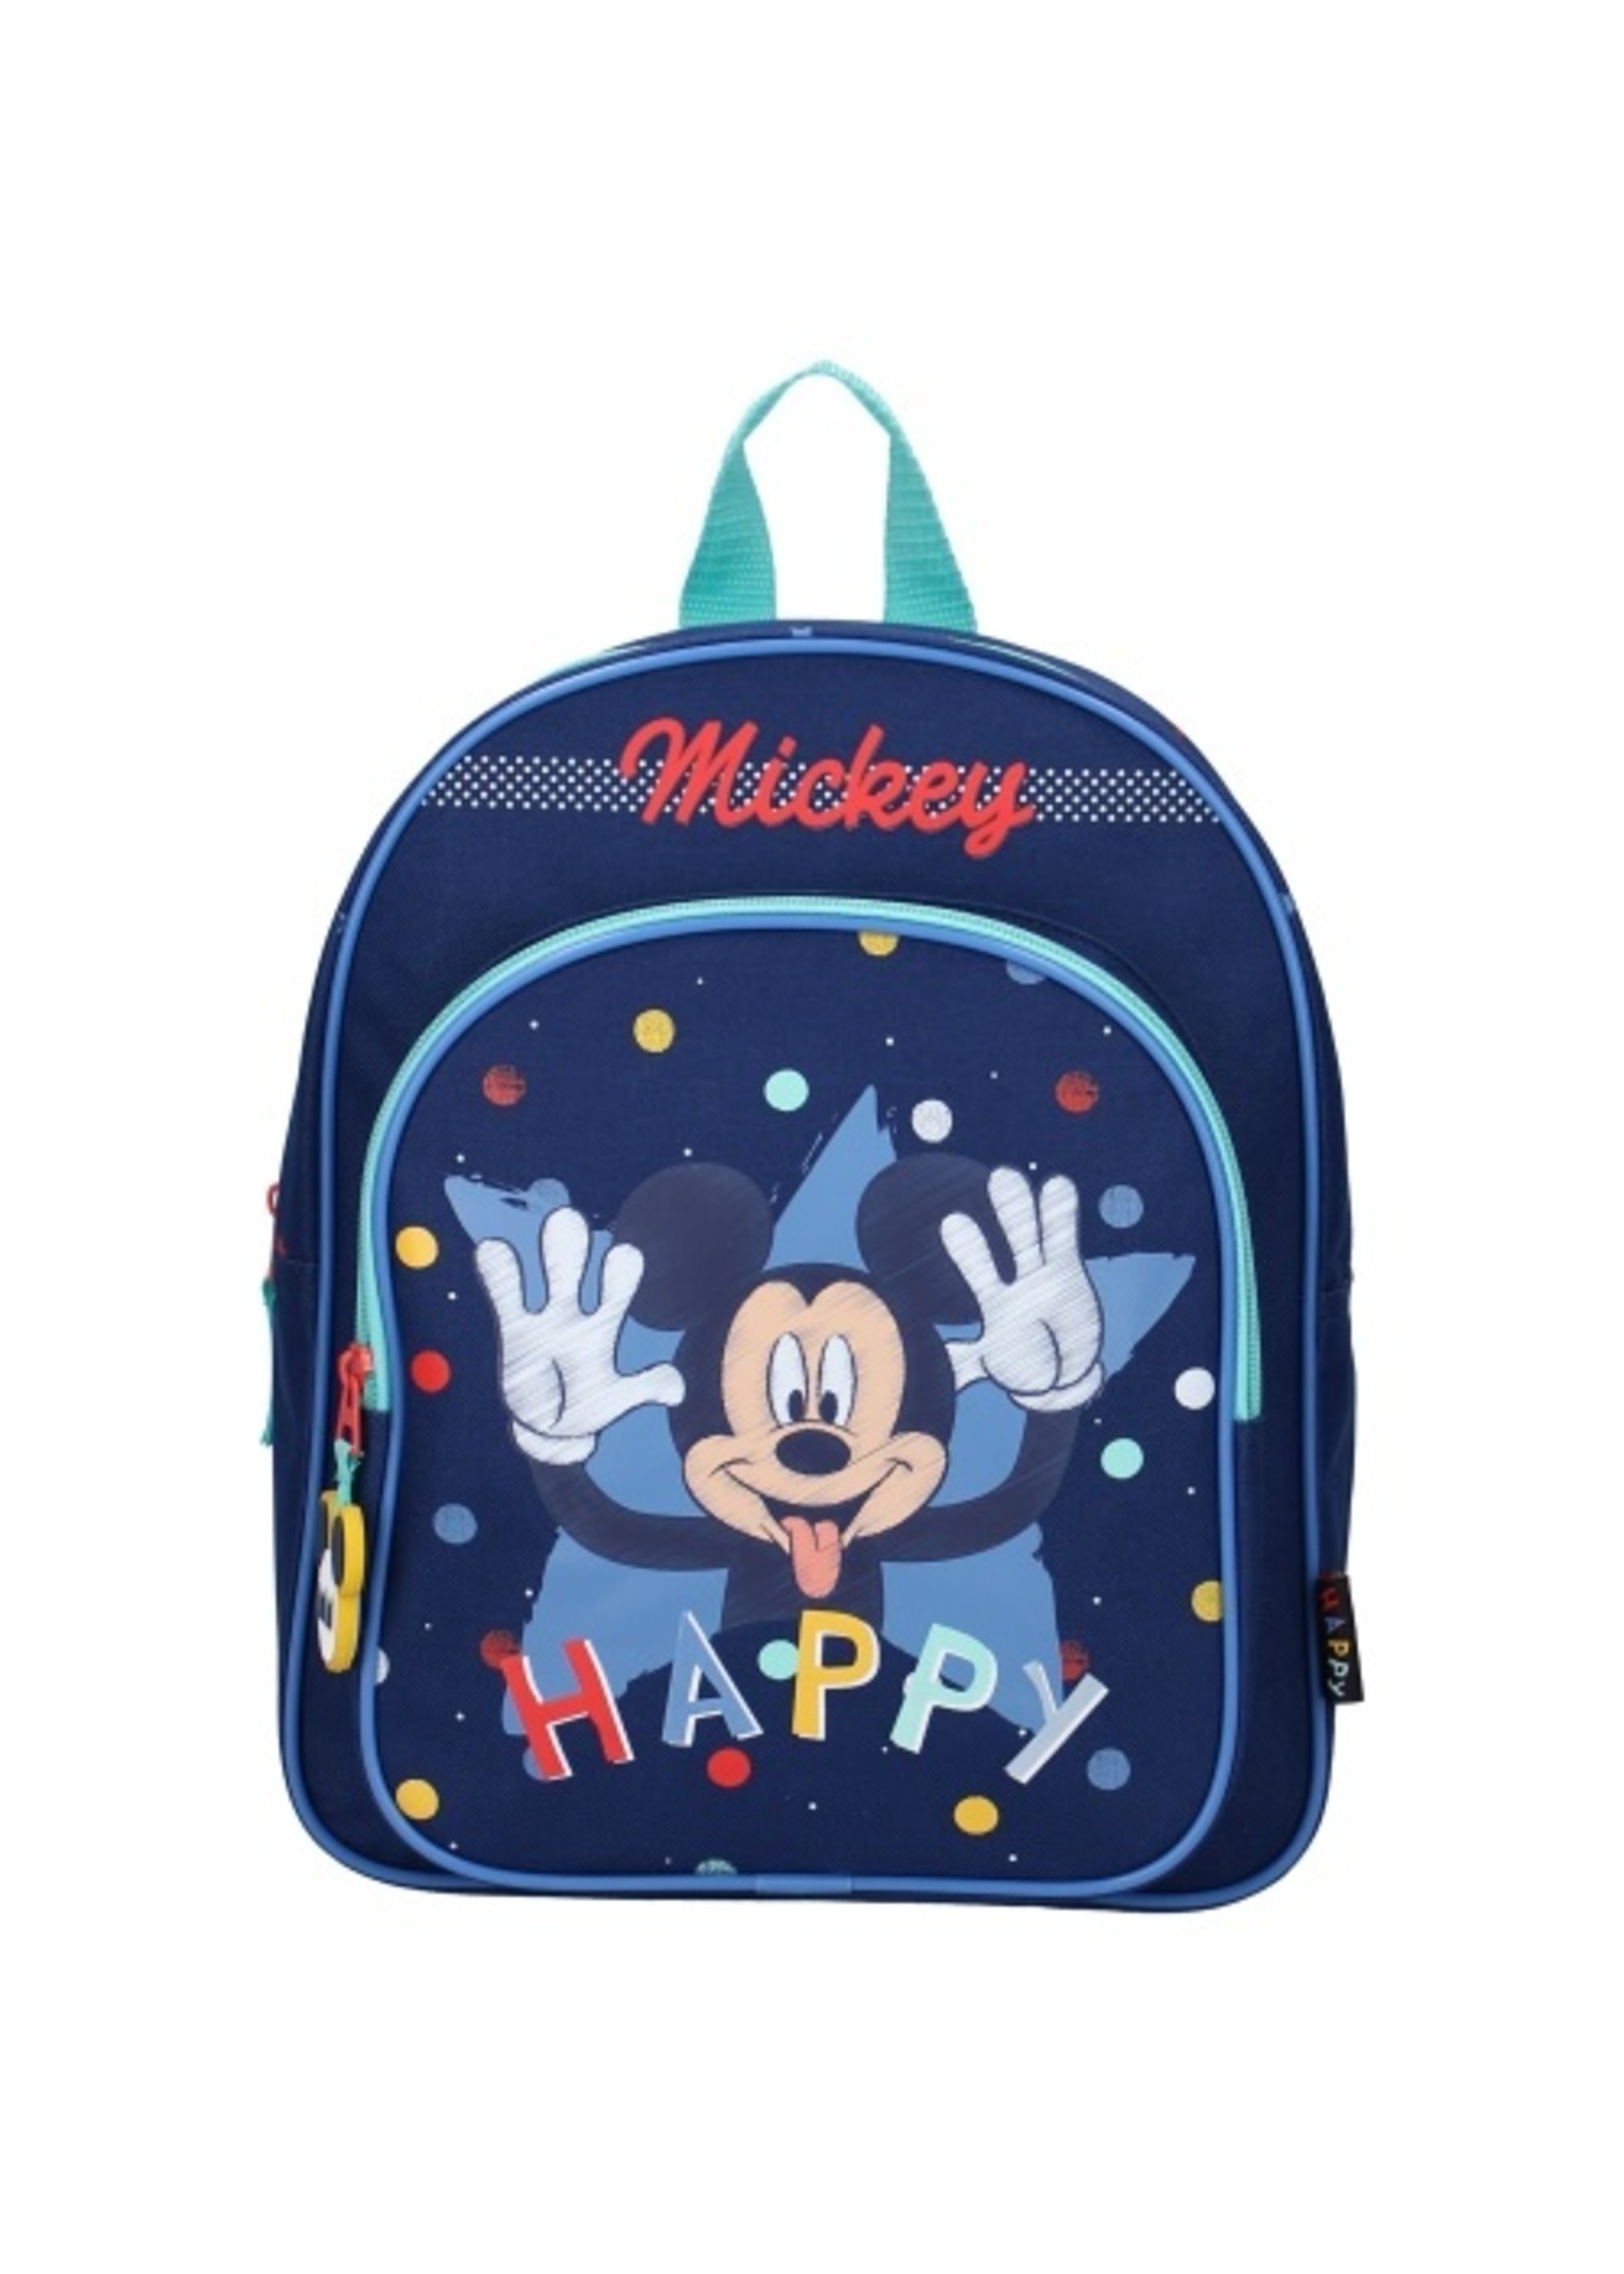 Disney Mickey Mouse backpack from Disney